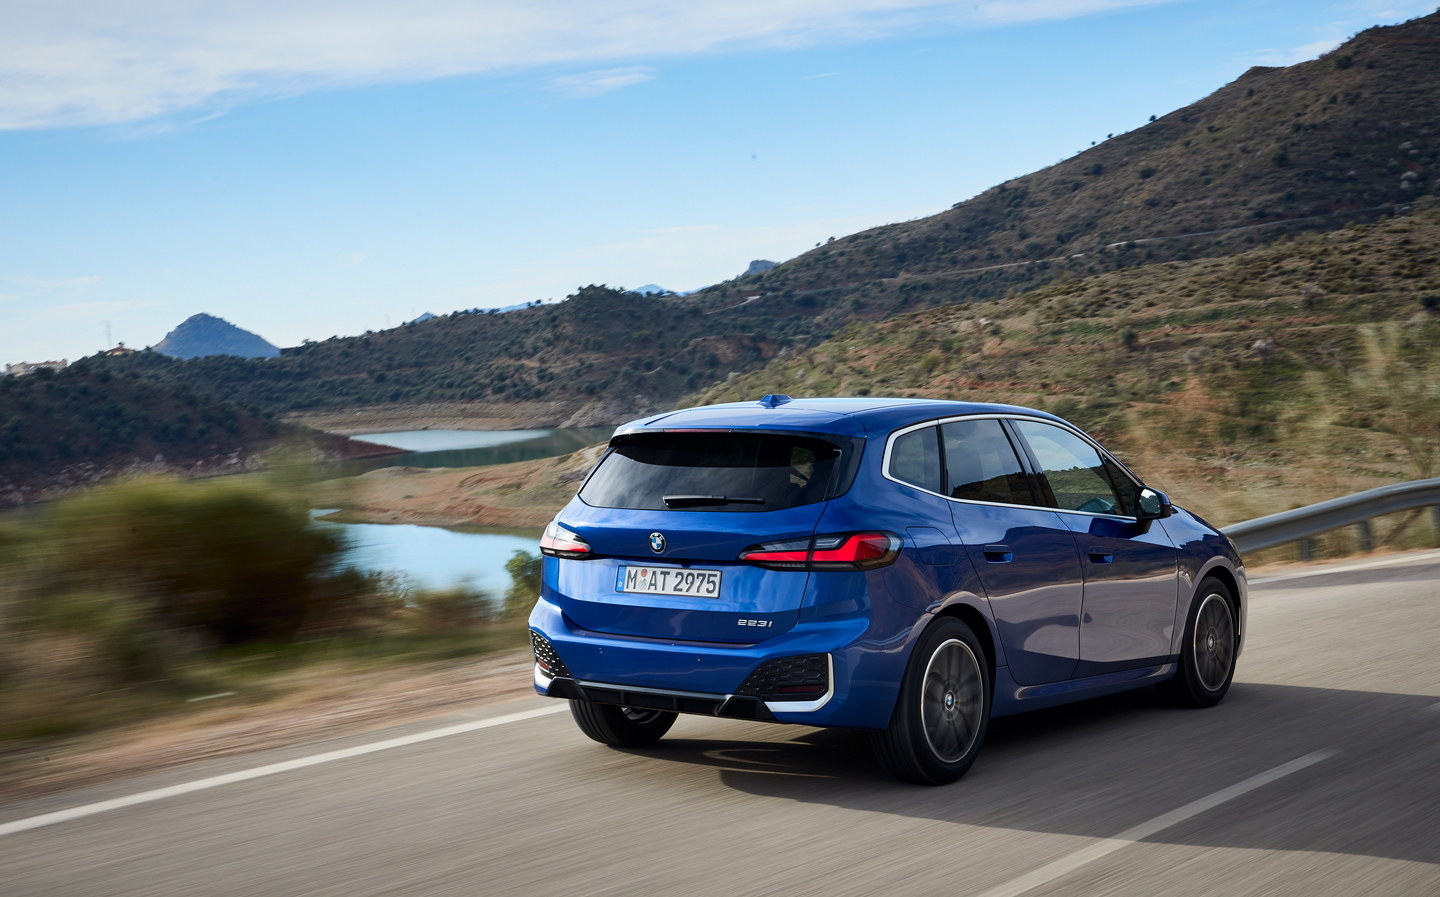 Test-Driving The New BMW 2 Series Active Tourer With Mild-Hybrid